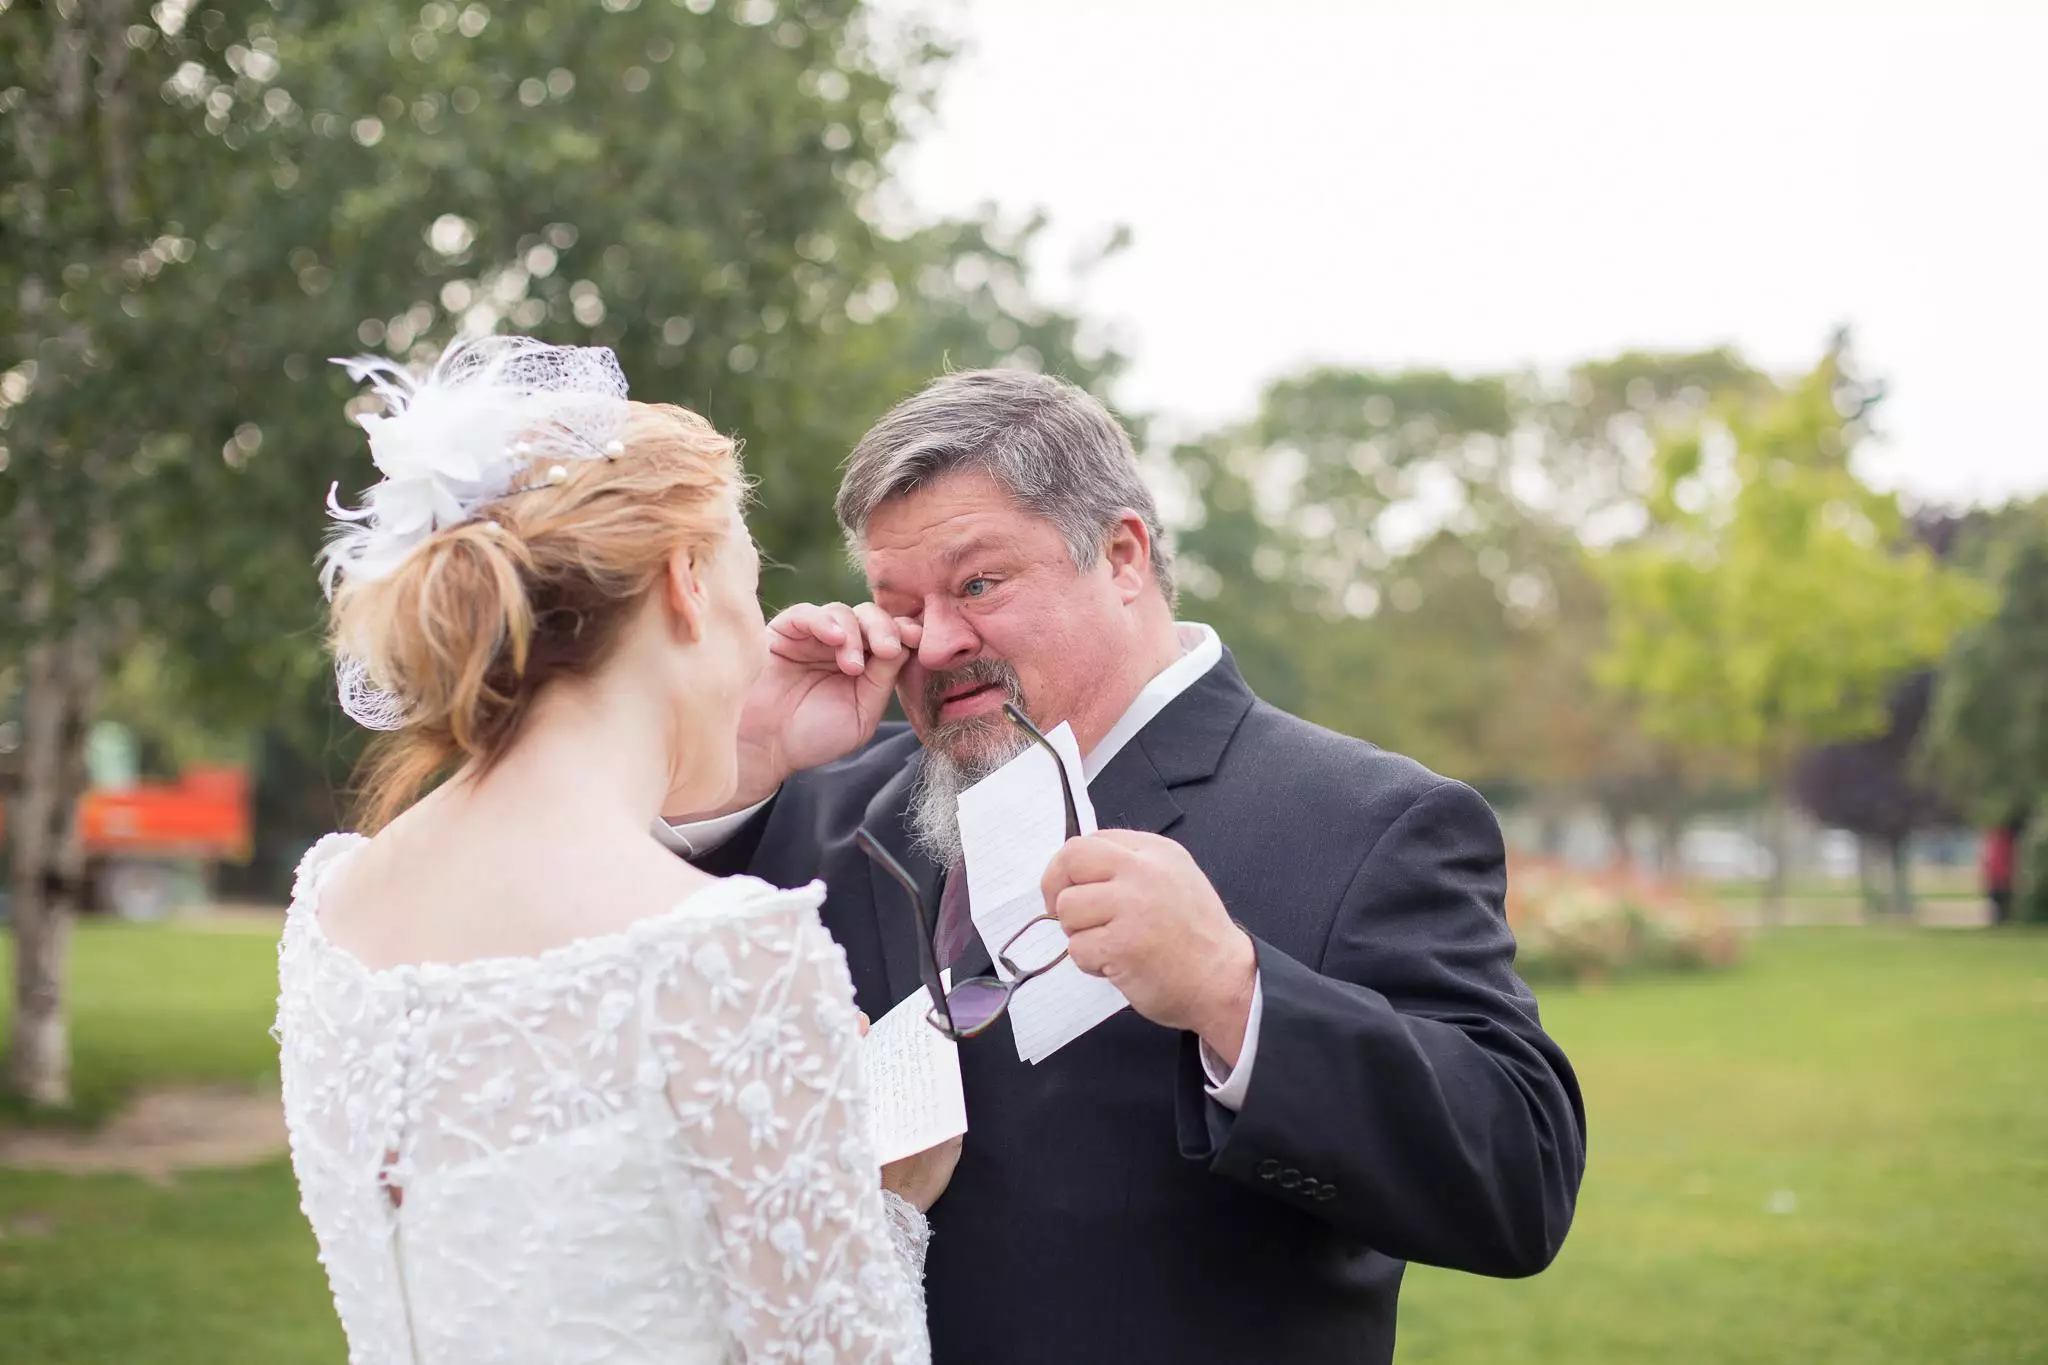 Dad Dies From Heart Attack Just Moments After Finishing The First Dance At His Daughter’s Wedding